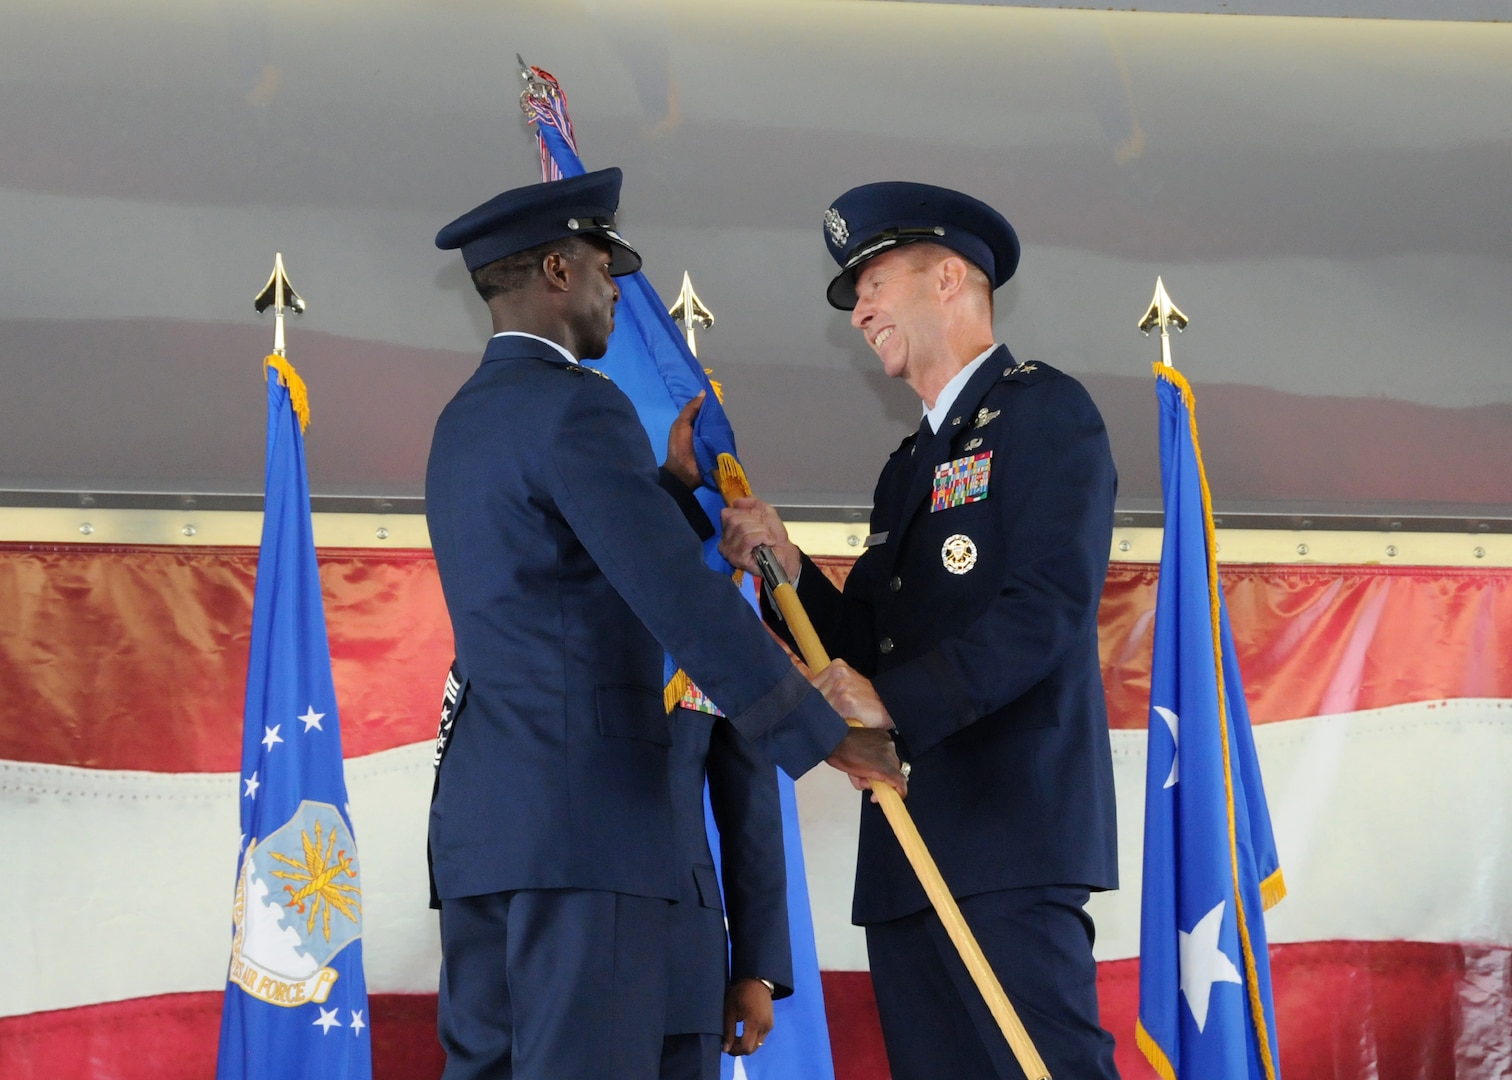 Maj. Gen. Mark Solo (right), 19th Air Force commander, passes the 19th AF flag to Gen. Edward A. Rice Jr., Air Education and Training Command commander, to relinquish command during the inactivation ceremony held at Joint Base San Antonio, Texas, July 12. (U.S. Air Force photo by Melissa Peterson)